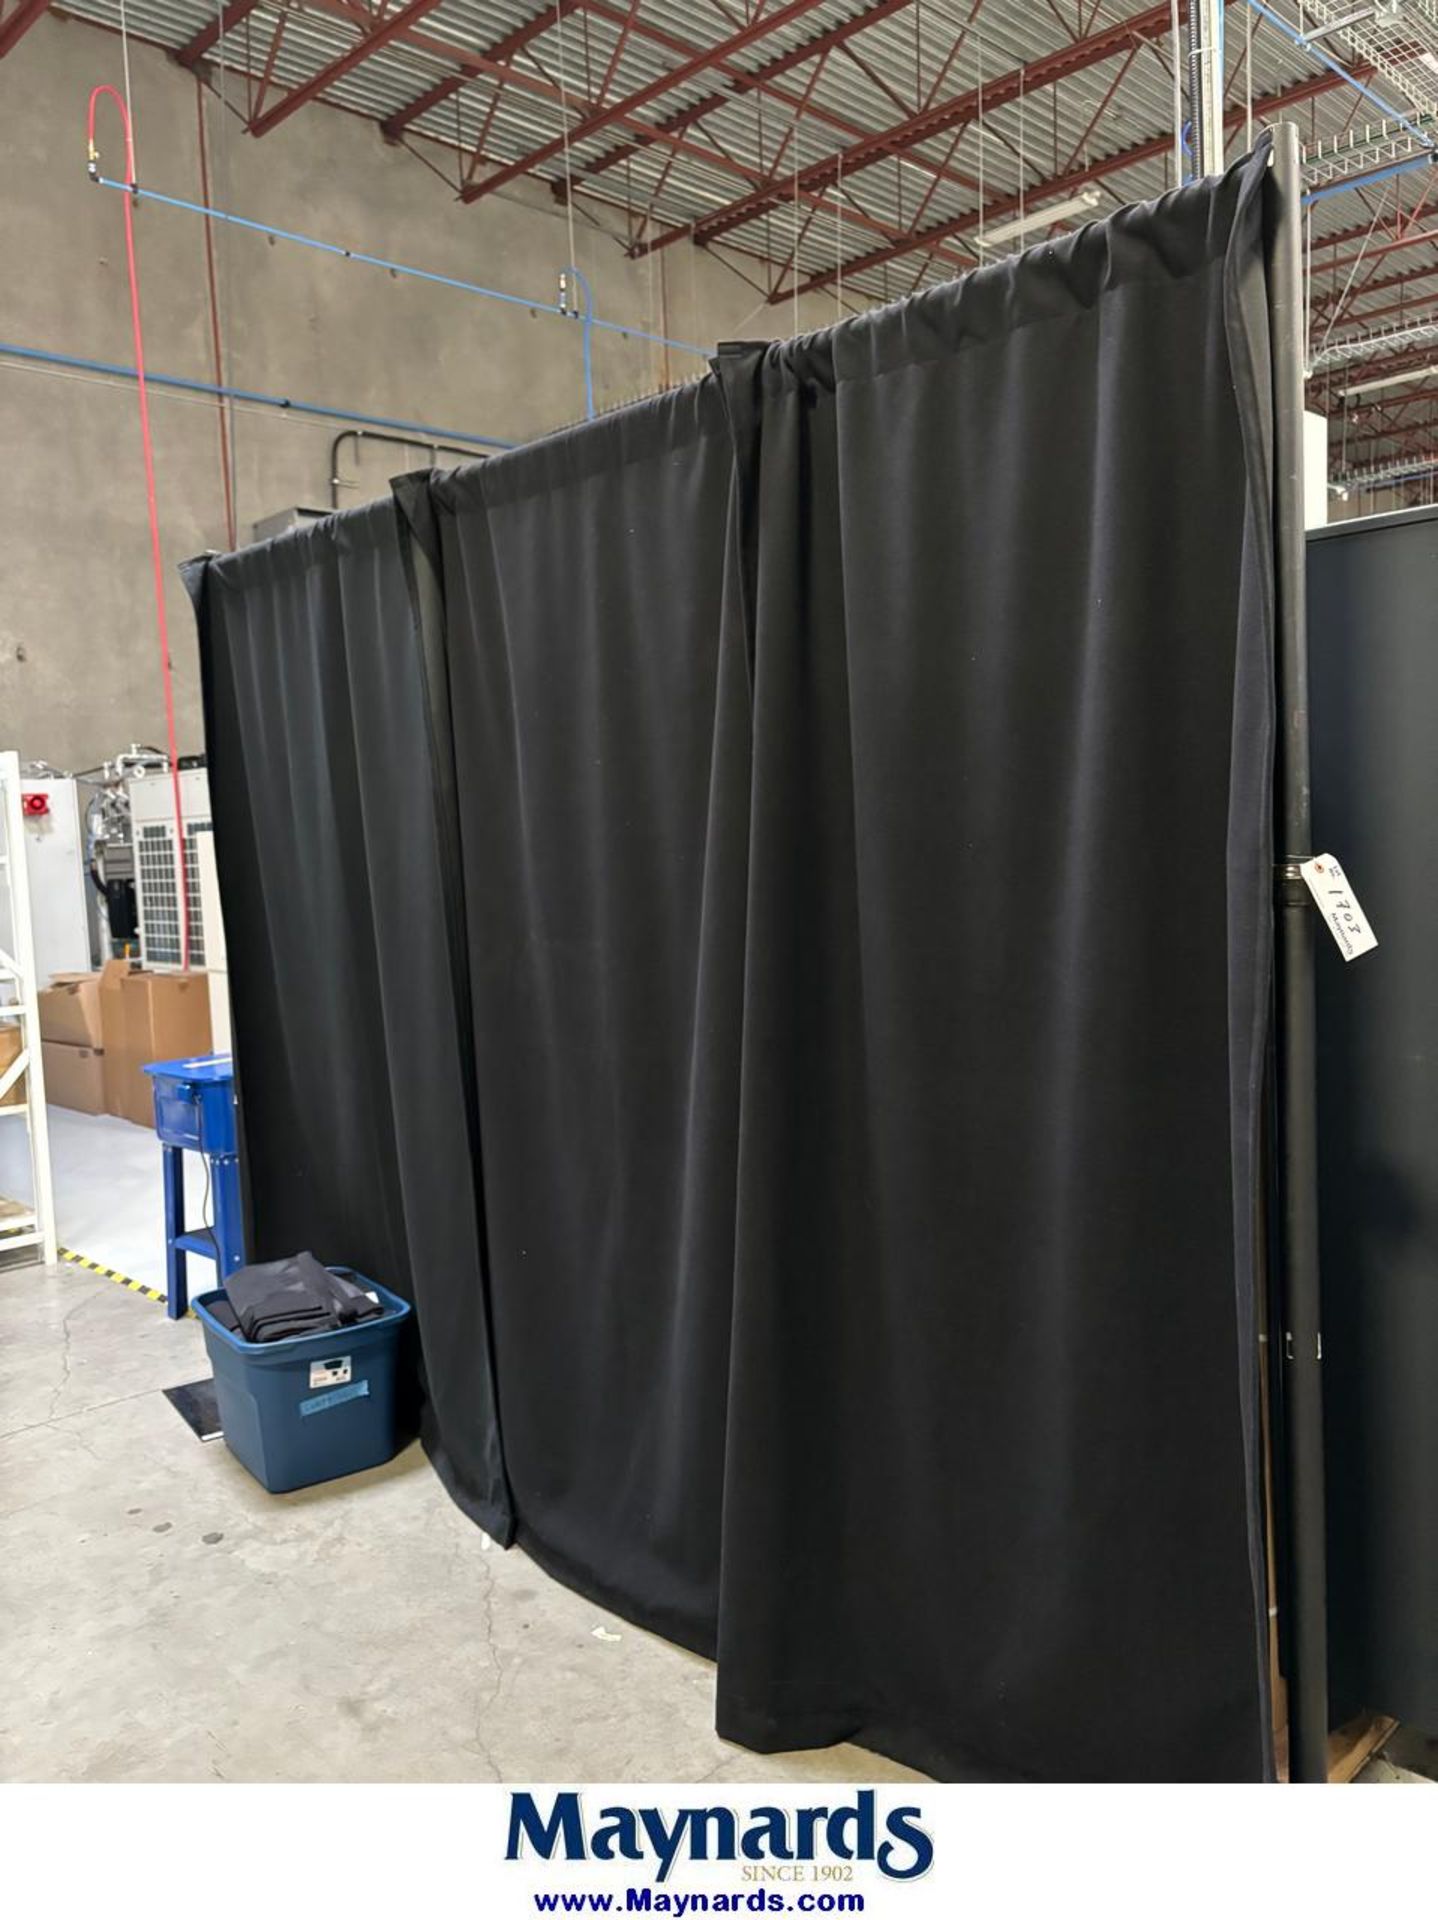 Display curtain with 2 posts